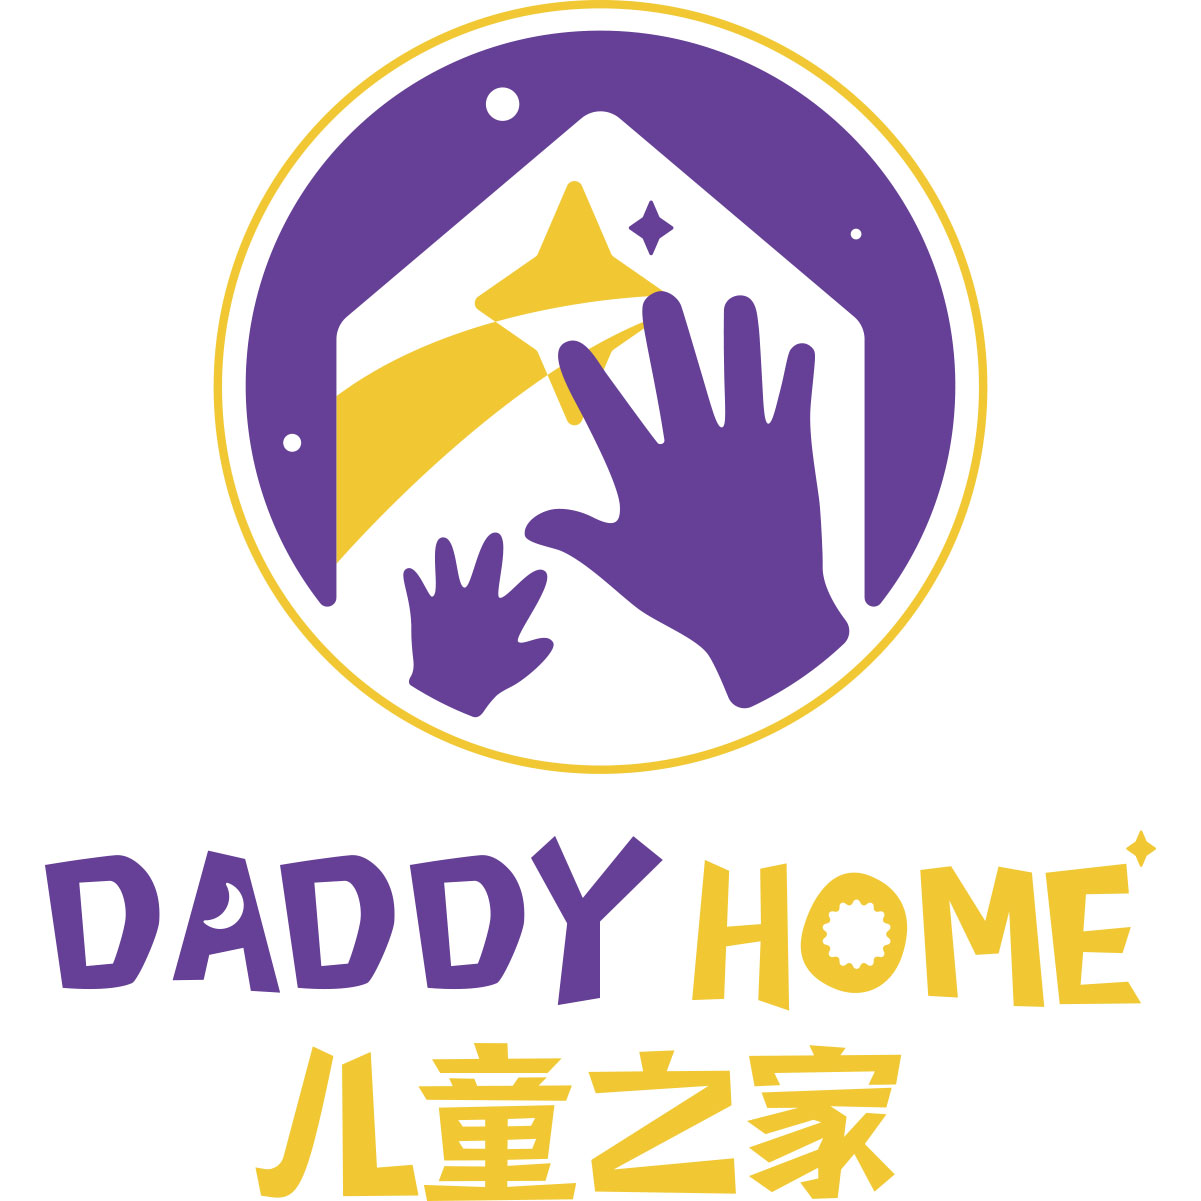 DADDY HOME